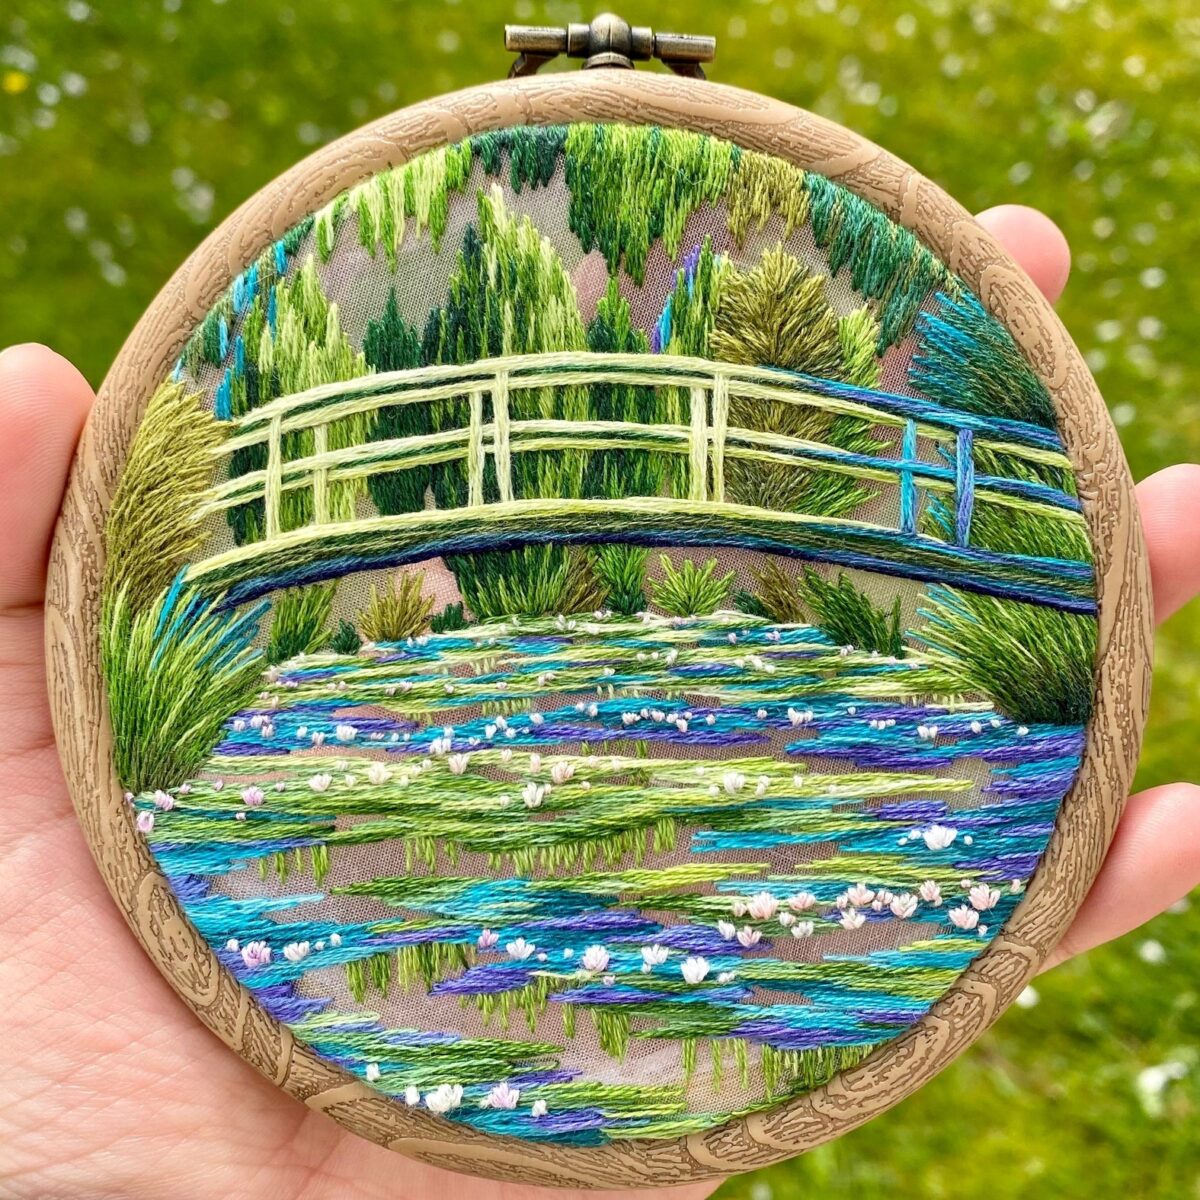 Gorgeous Embroidery Hoop Arts Of Natural Landscapes By Sew Beautiful 9